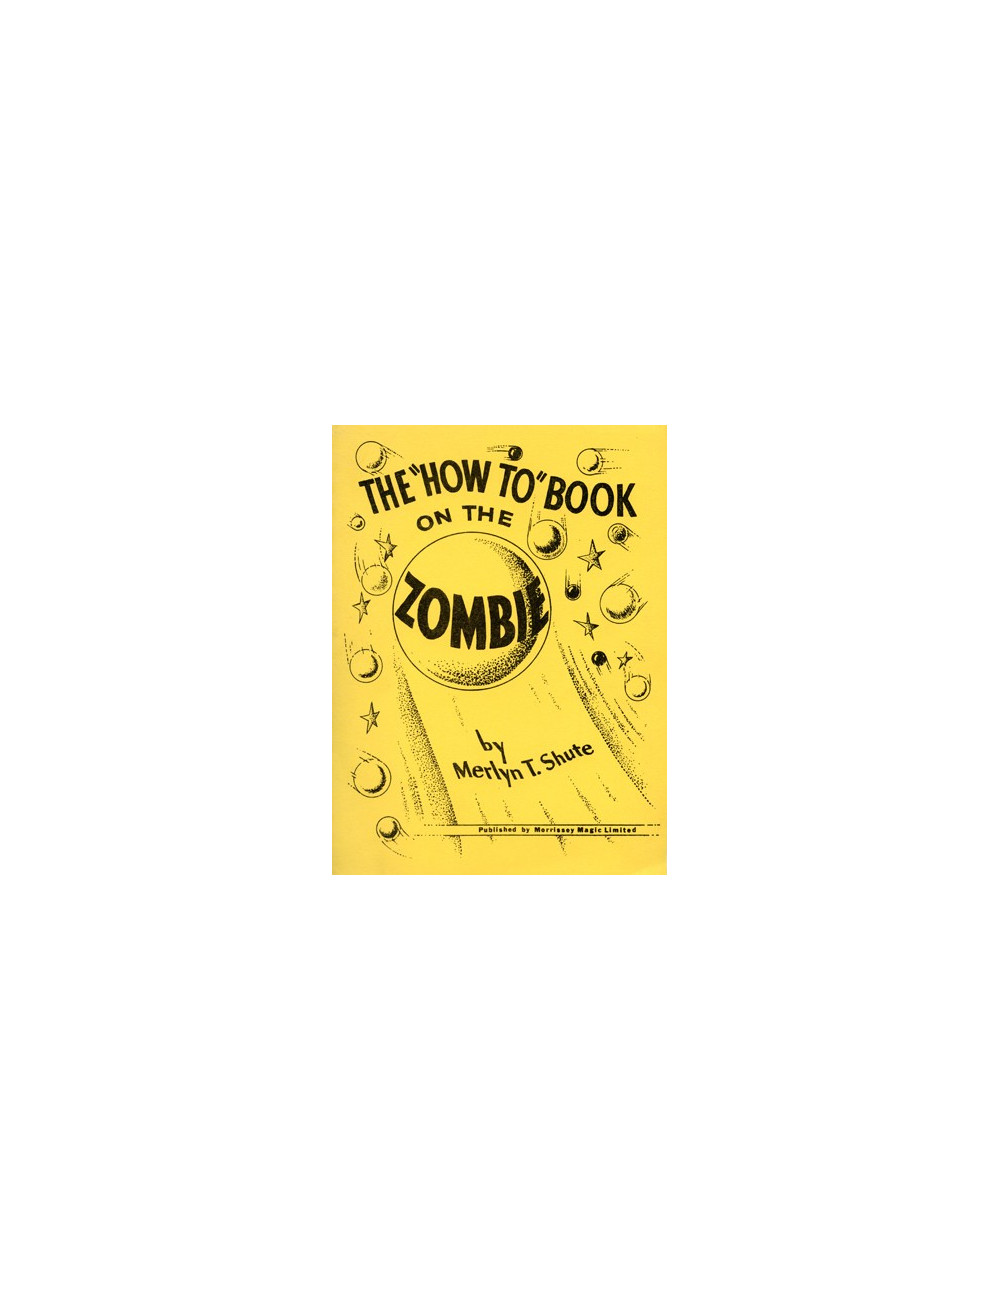 THE “HOW TO“ BOOK ON THE ZOMBIE by Merlyn T. Shute